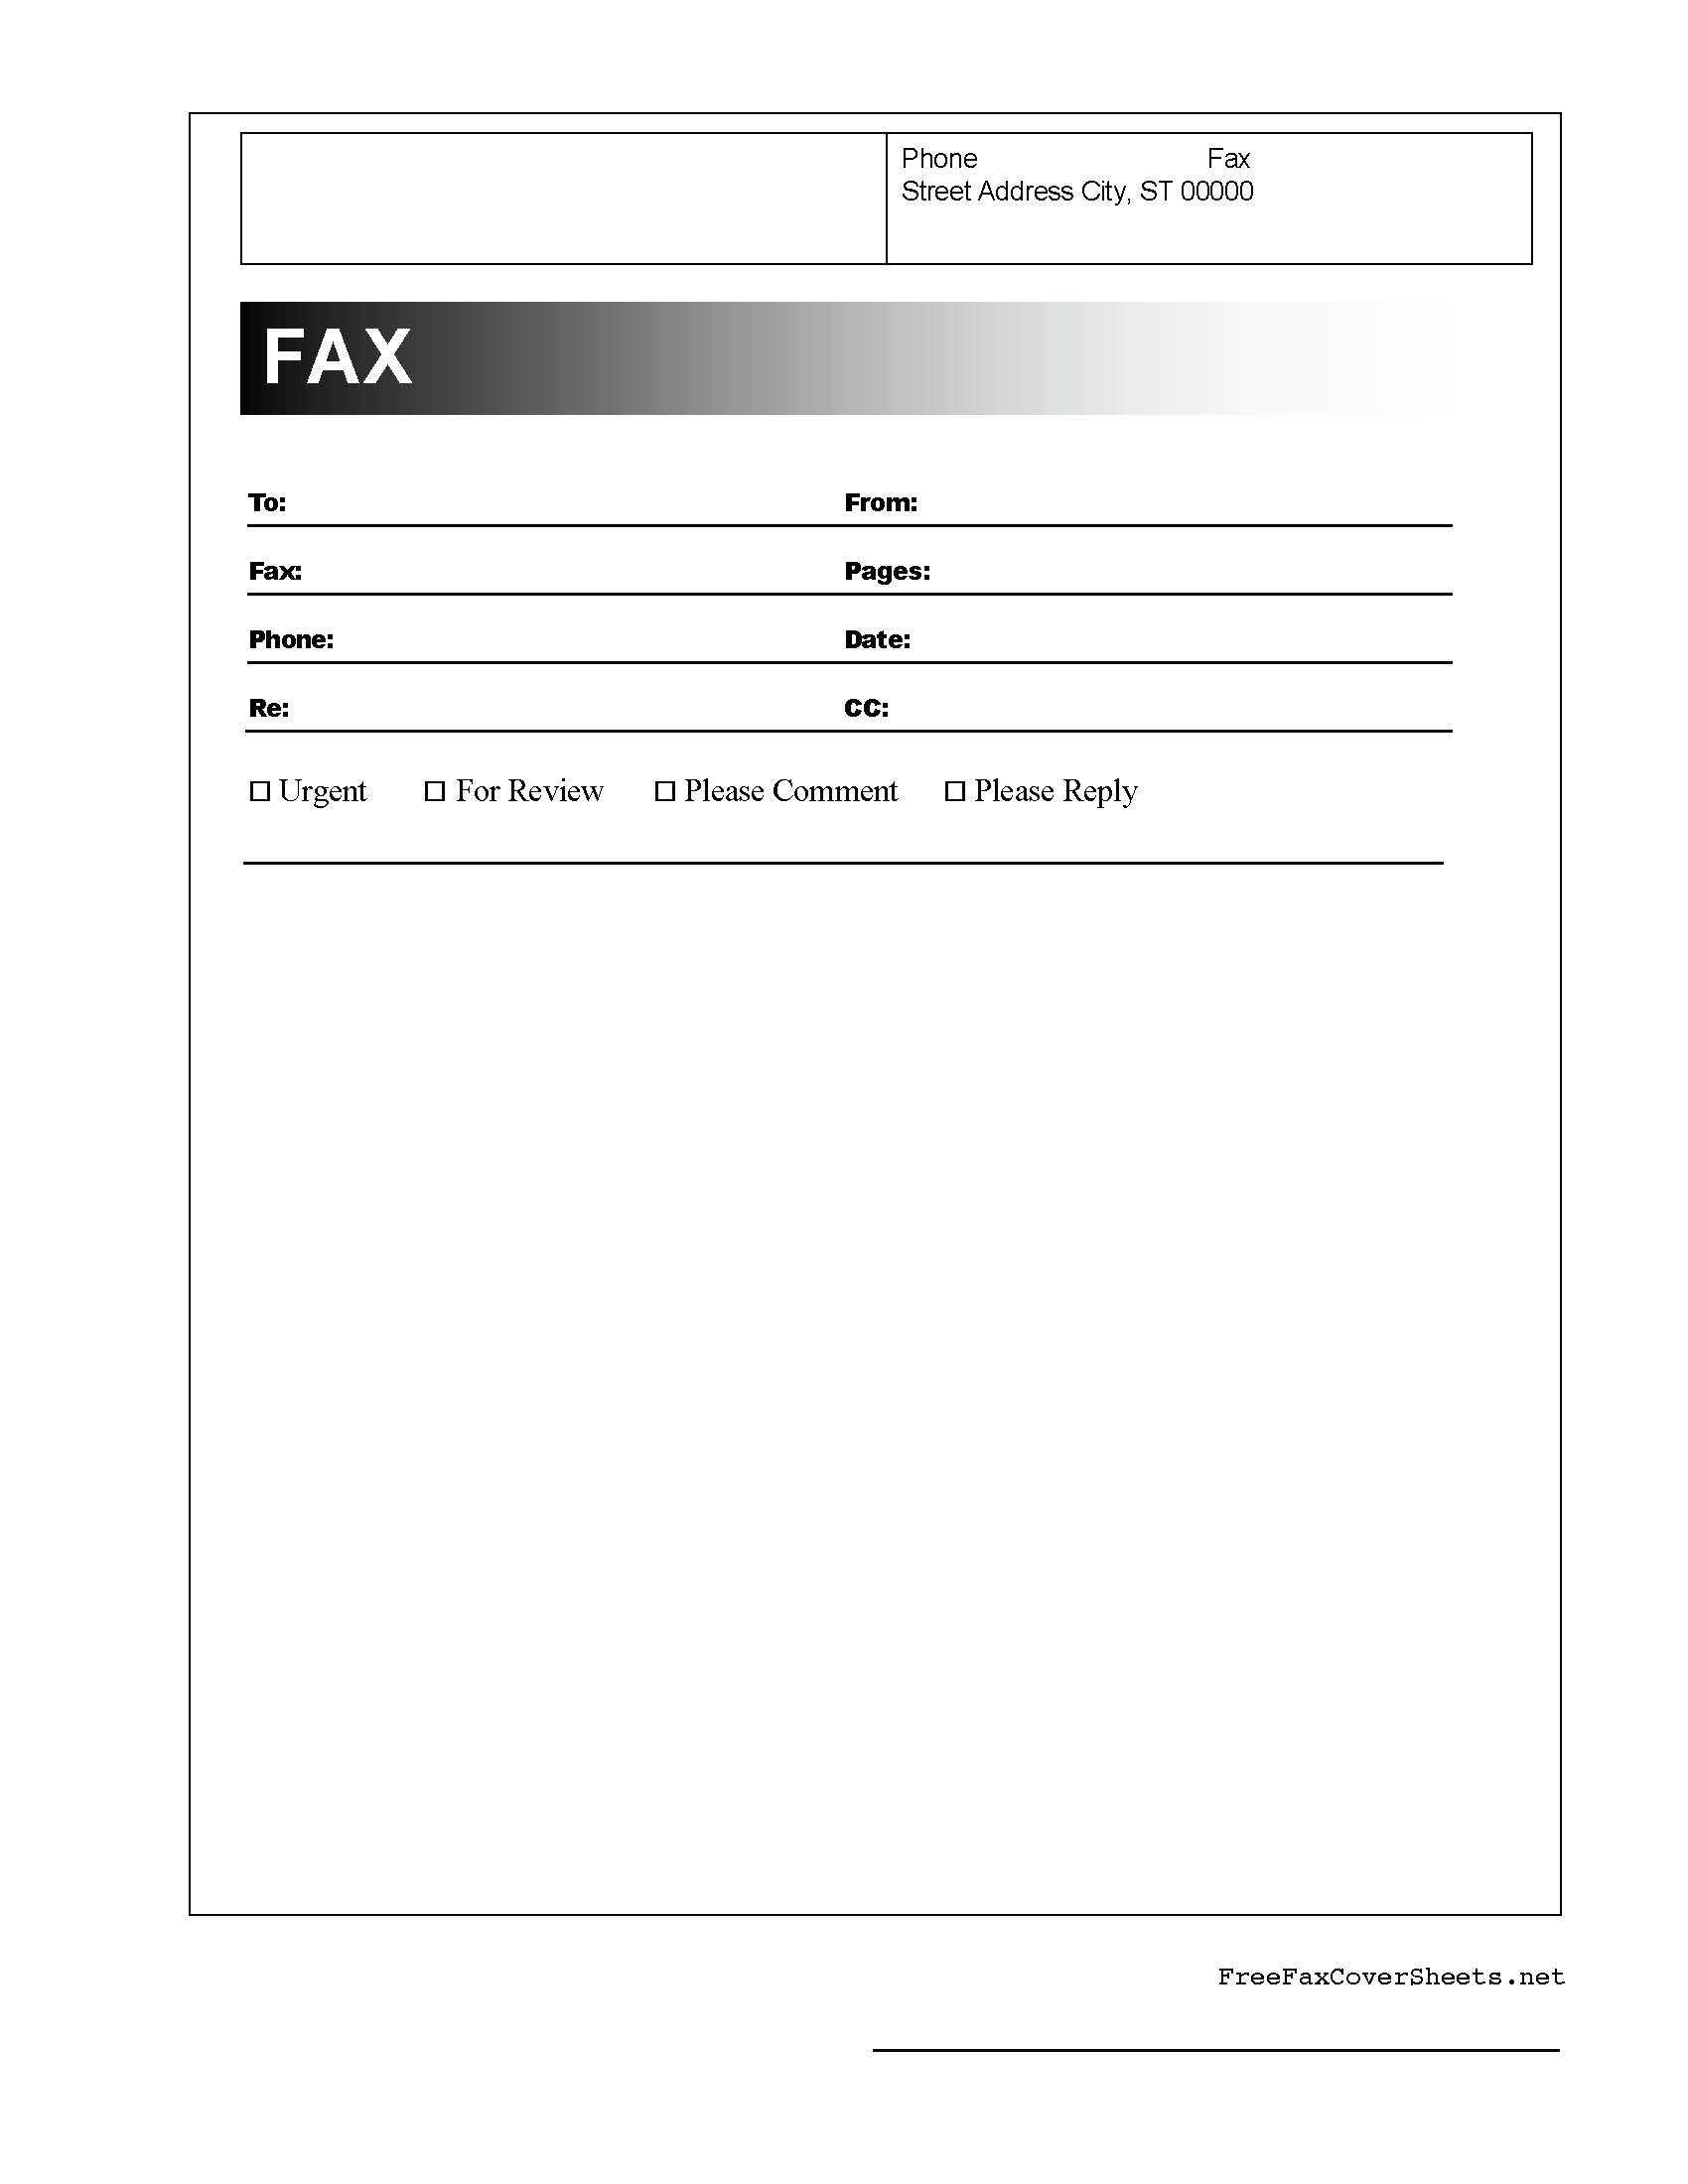 028 Basic Fax Cover Sheet Template Templates Word Amazing In Fax Cover Sheet Template Word 2010